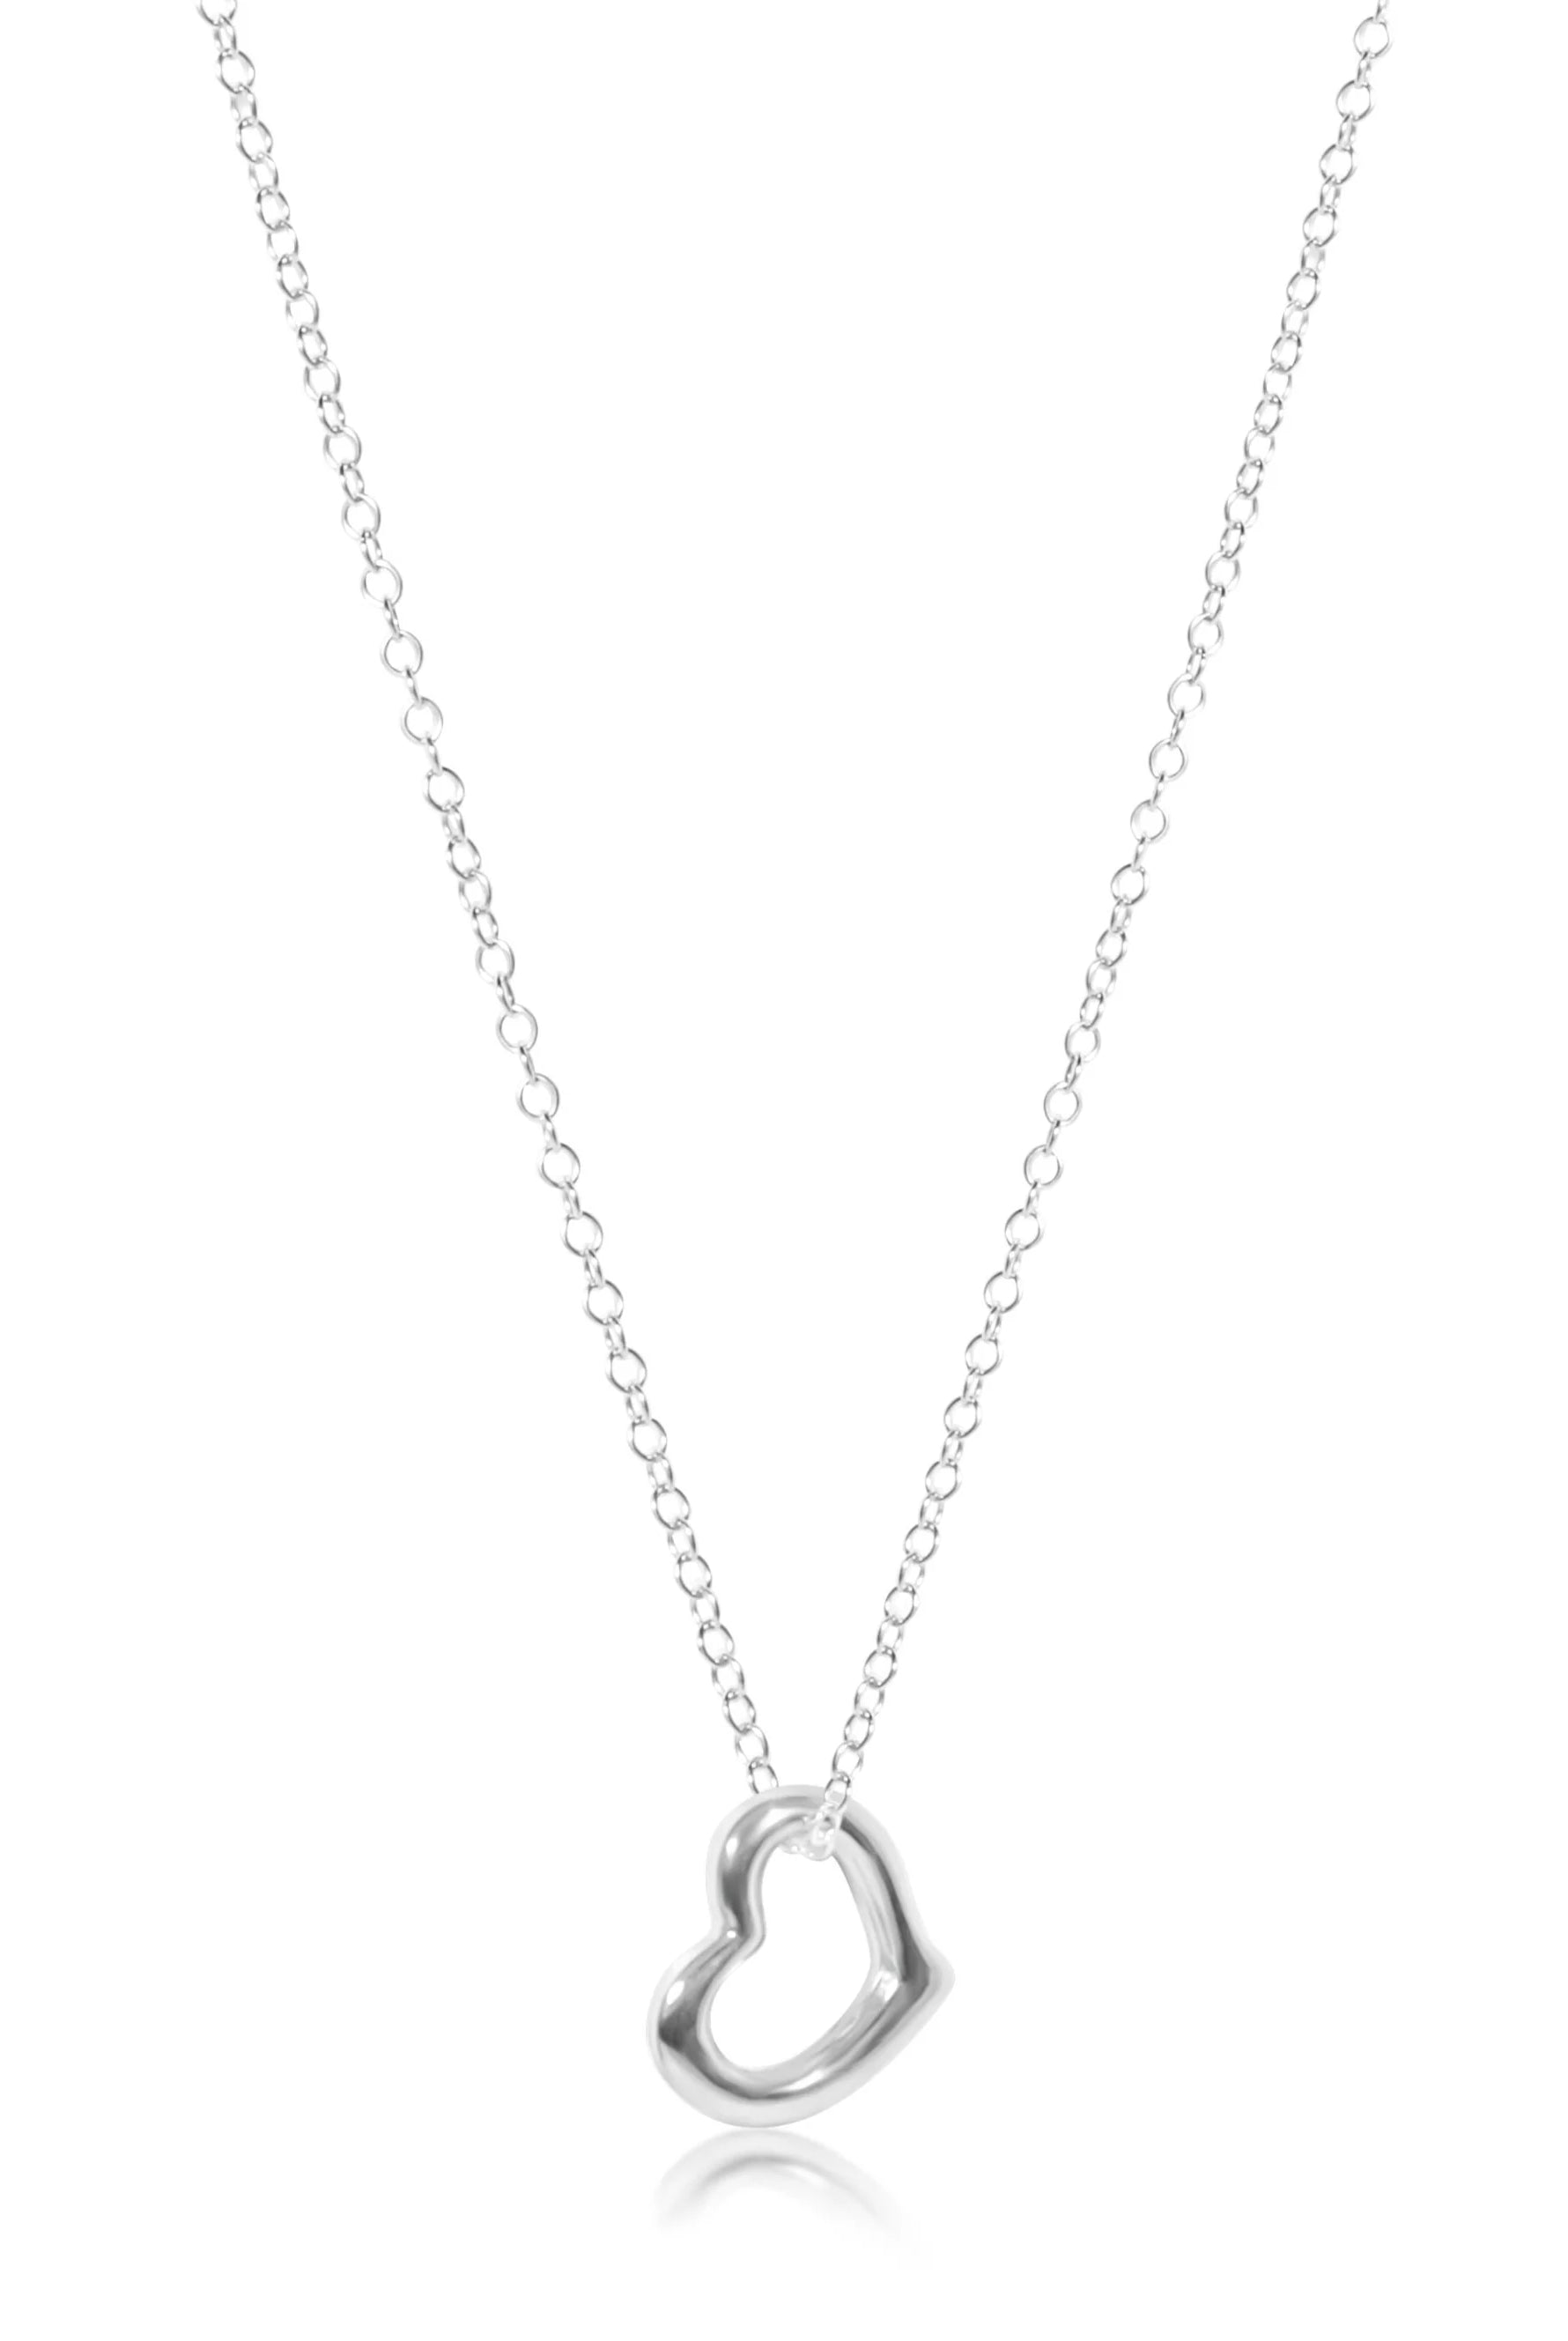 16” Sterling Love Charm Necklace-Necklaces-eNewton-The Lovely Closet, Women's Fashion Boutique in Alexandria, KY